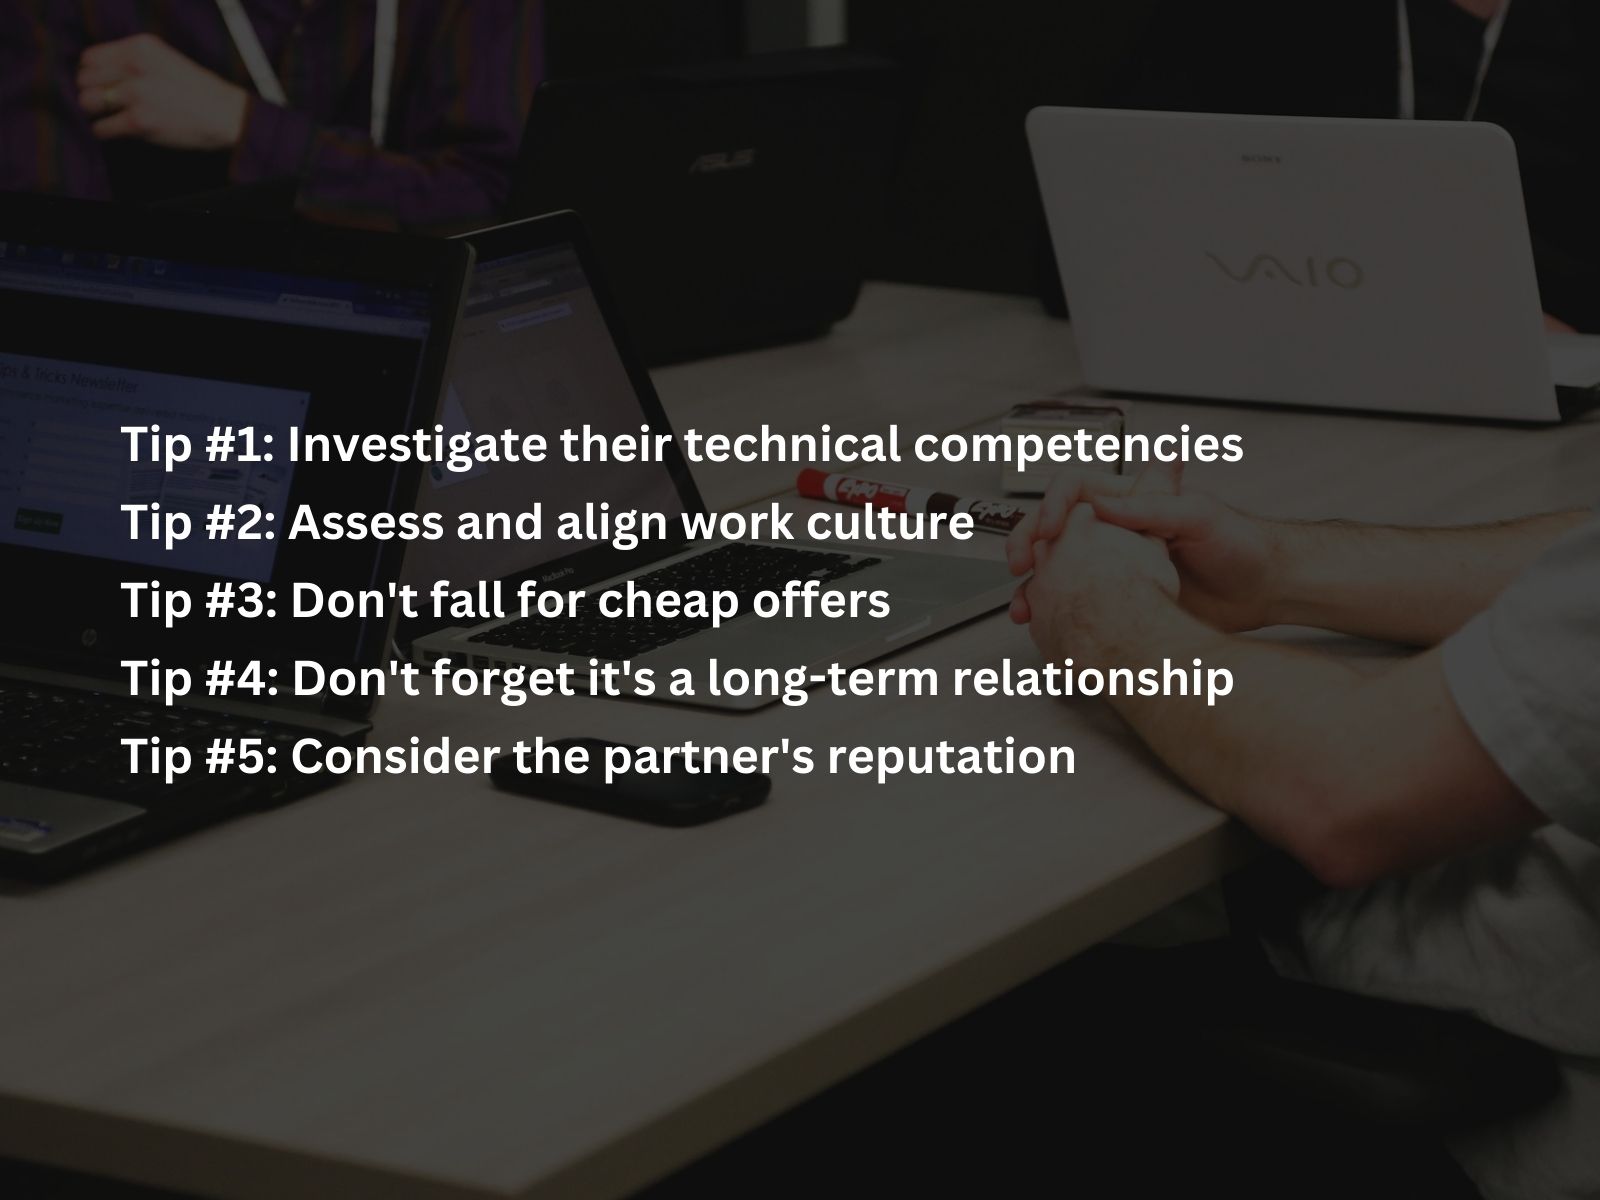 Top 10 mistakes companies make when searching for the right software engineering people (+ tips on how to avoid them)